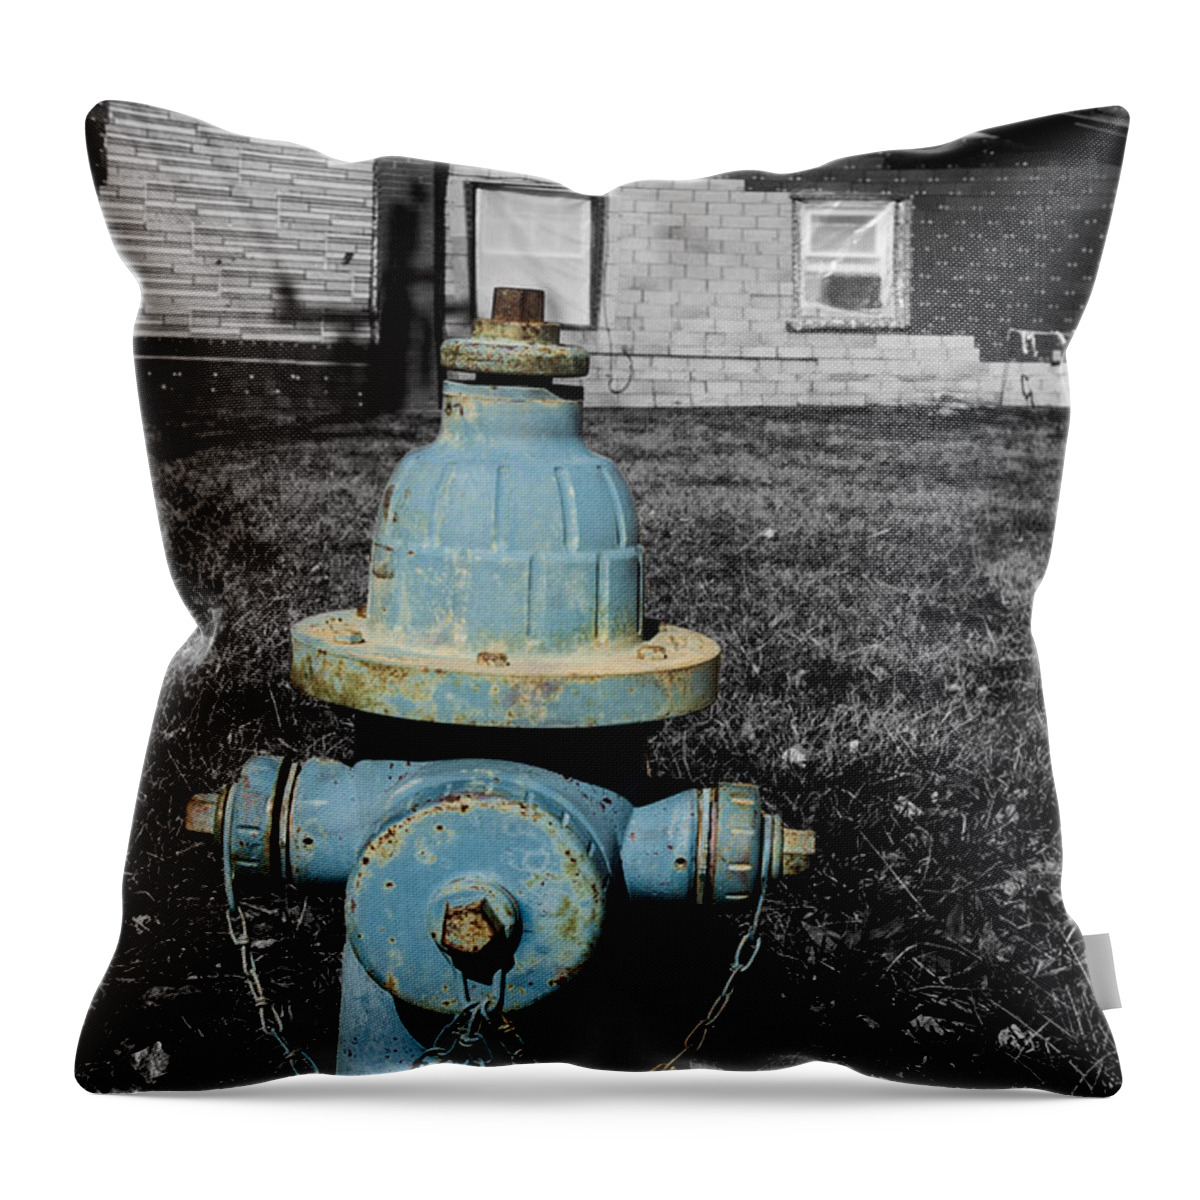  Throw Pillow featuring the photograph Blue by Melissa Newcomb